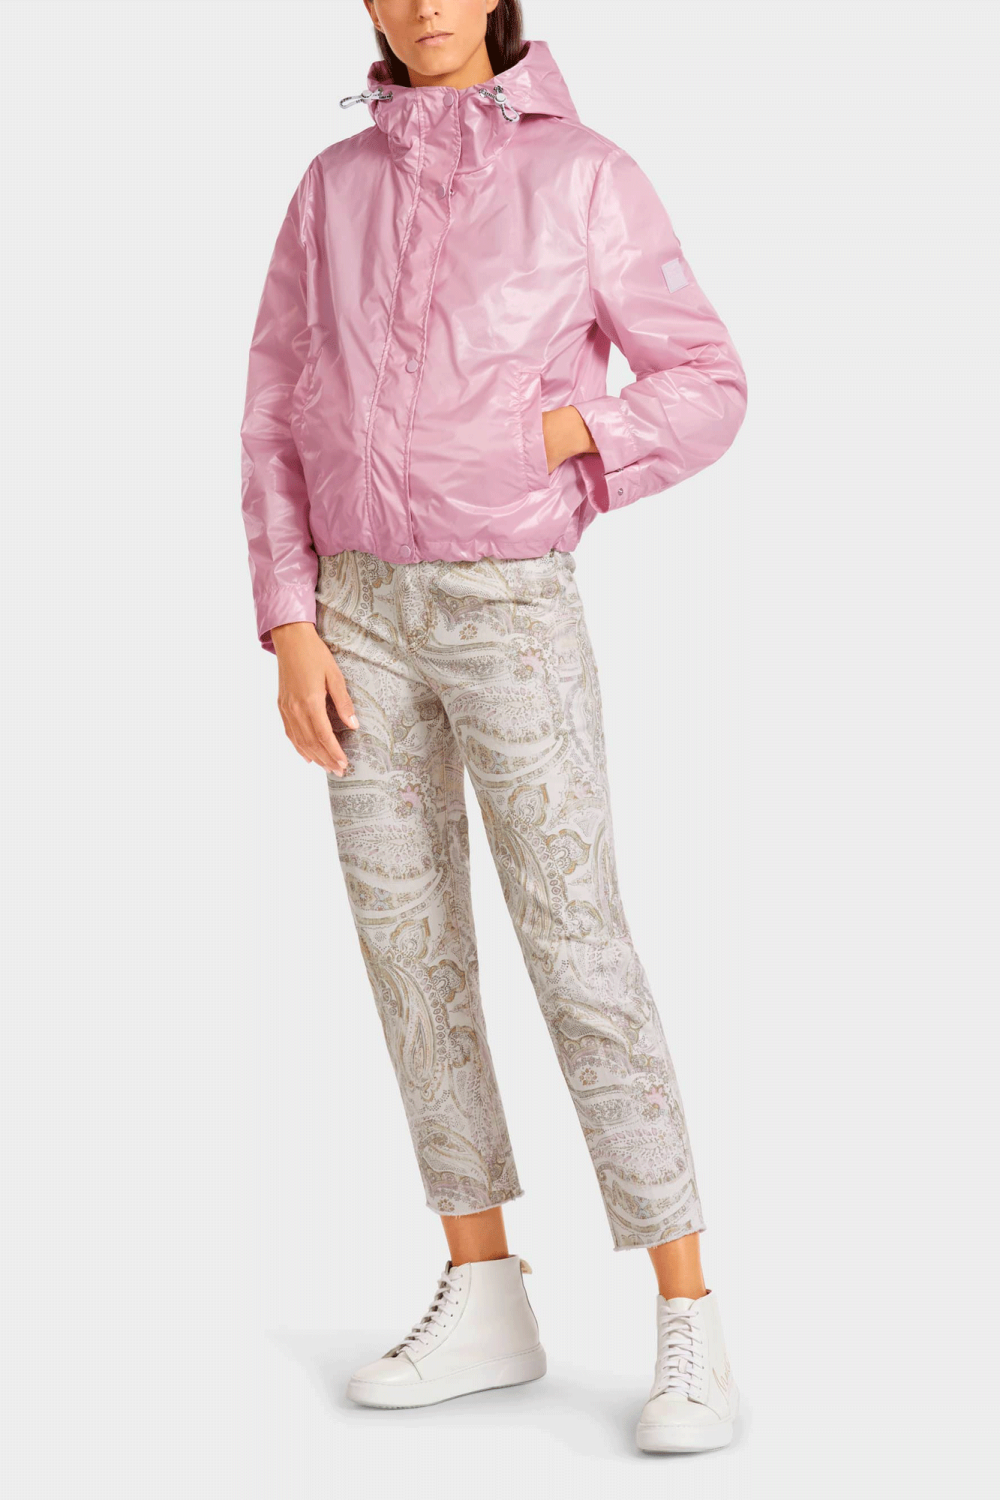 Be prepared for unpredictable weather with this Tough and Sweet Outdoor Jacket from Marc Cain. 